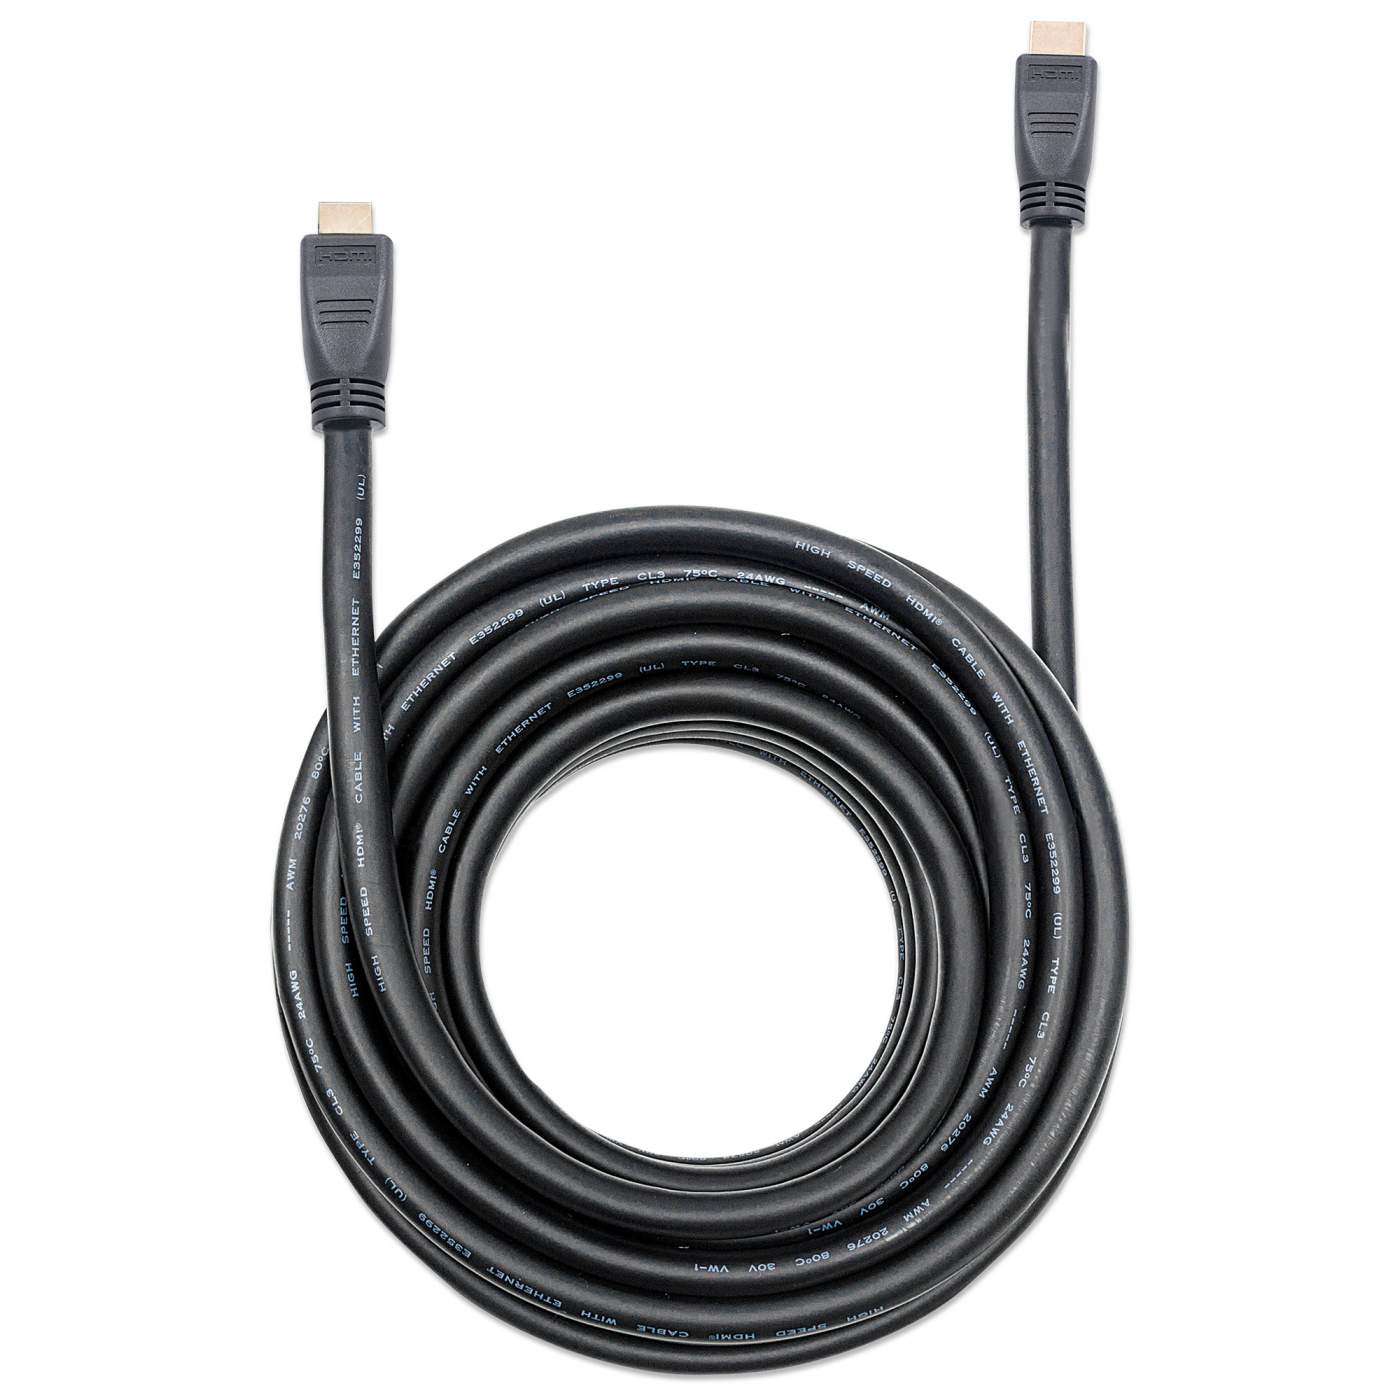 In-wall CL3 High Speed HDMI Cable with Ethernet